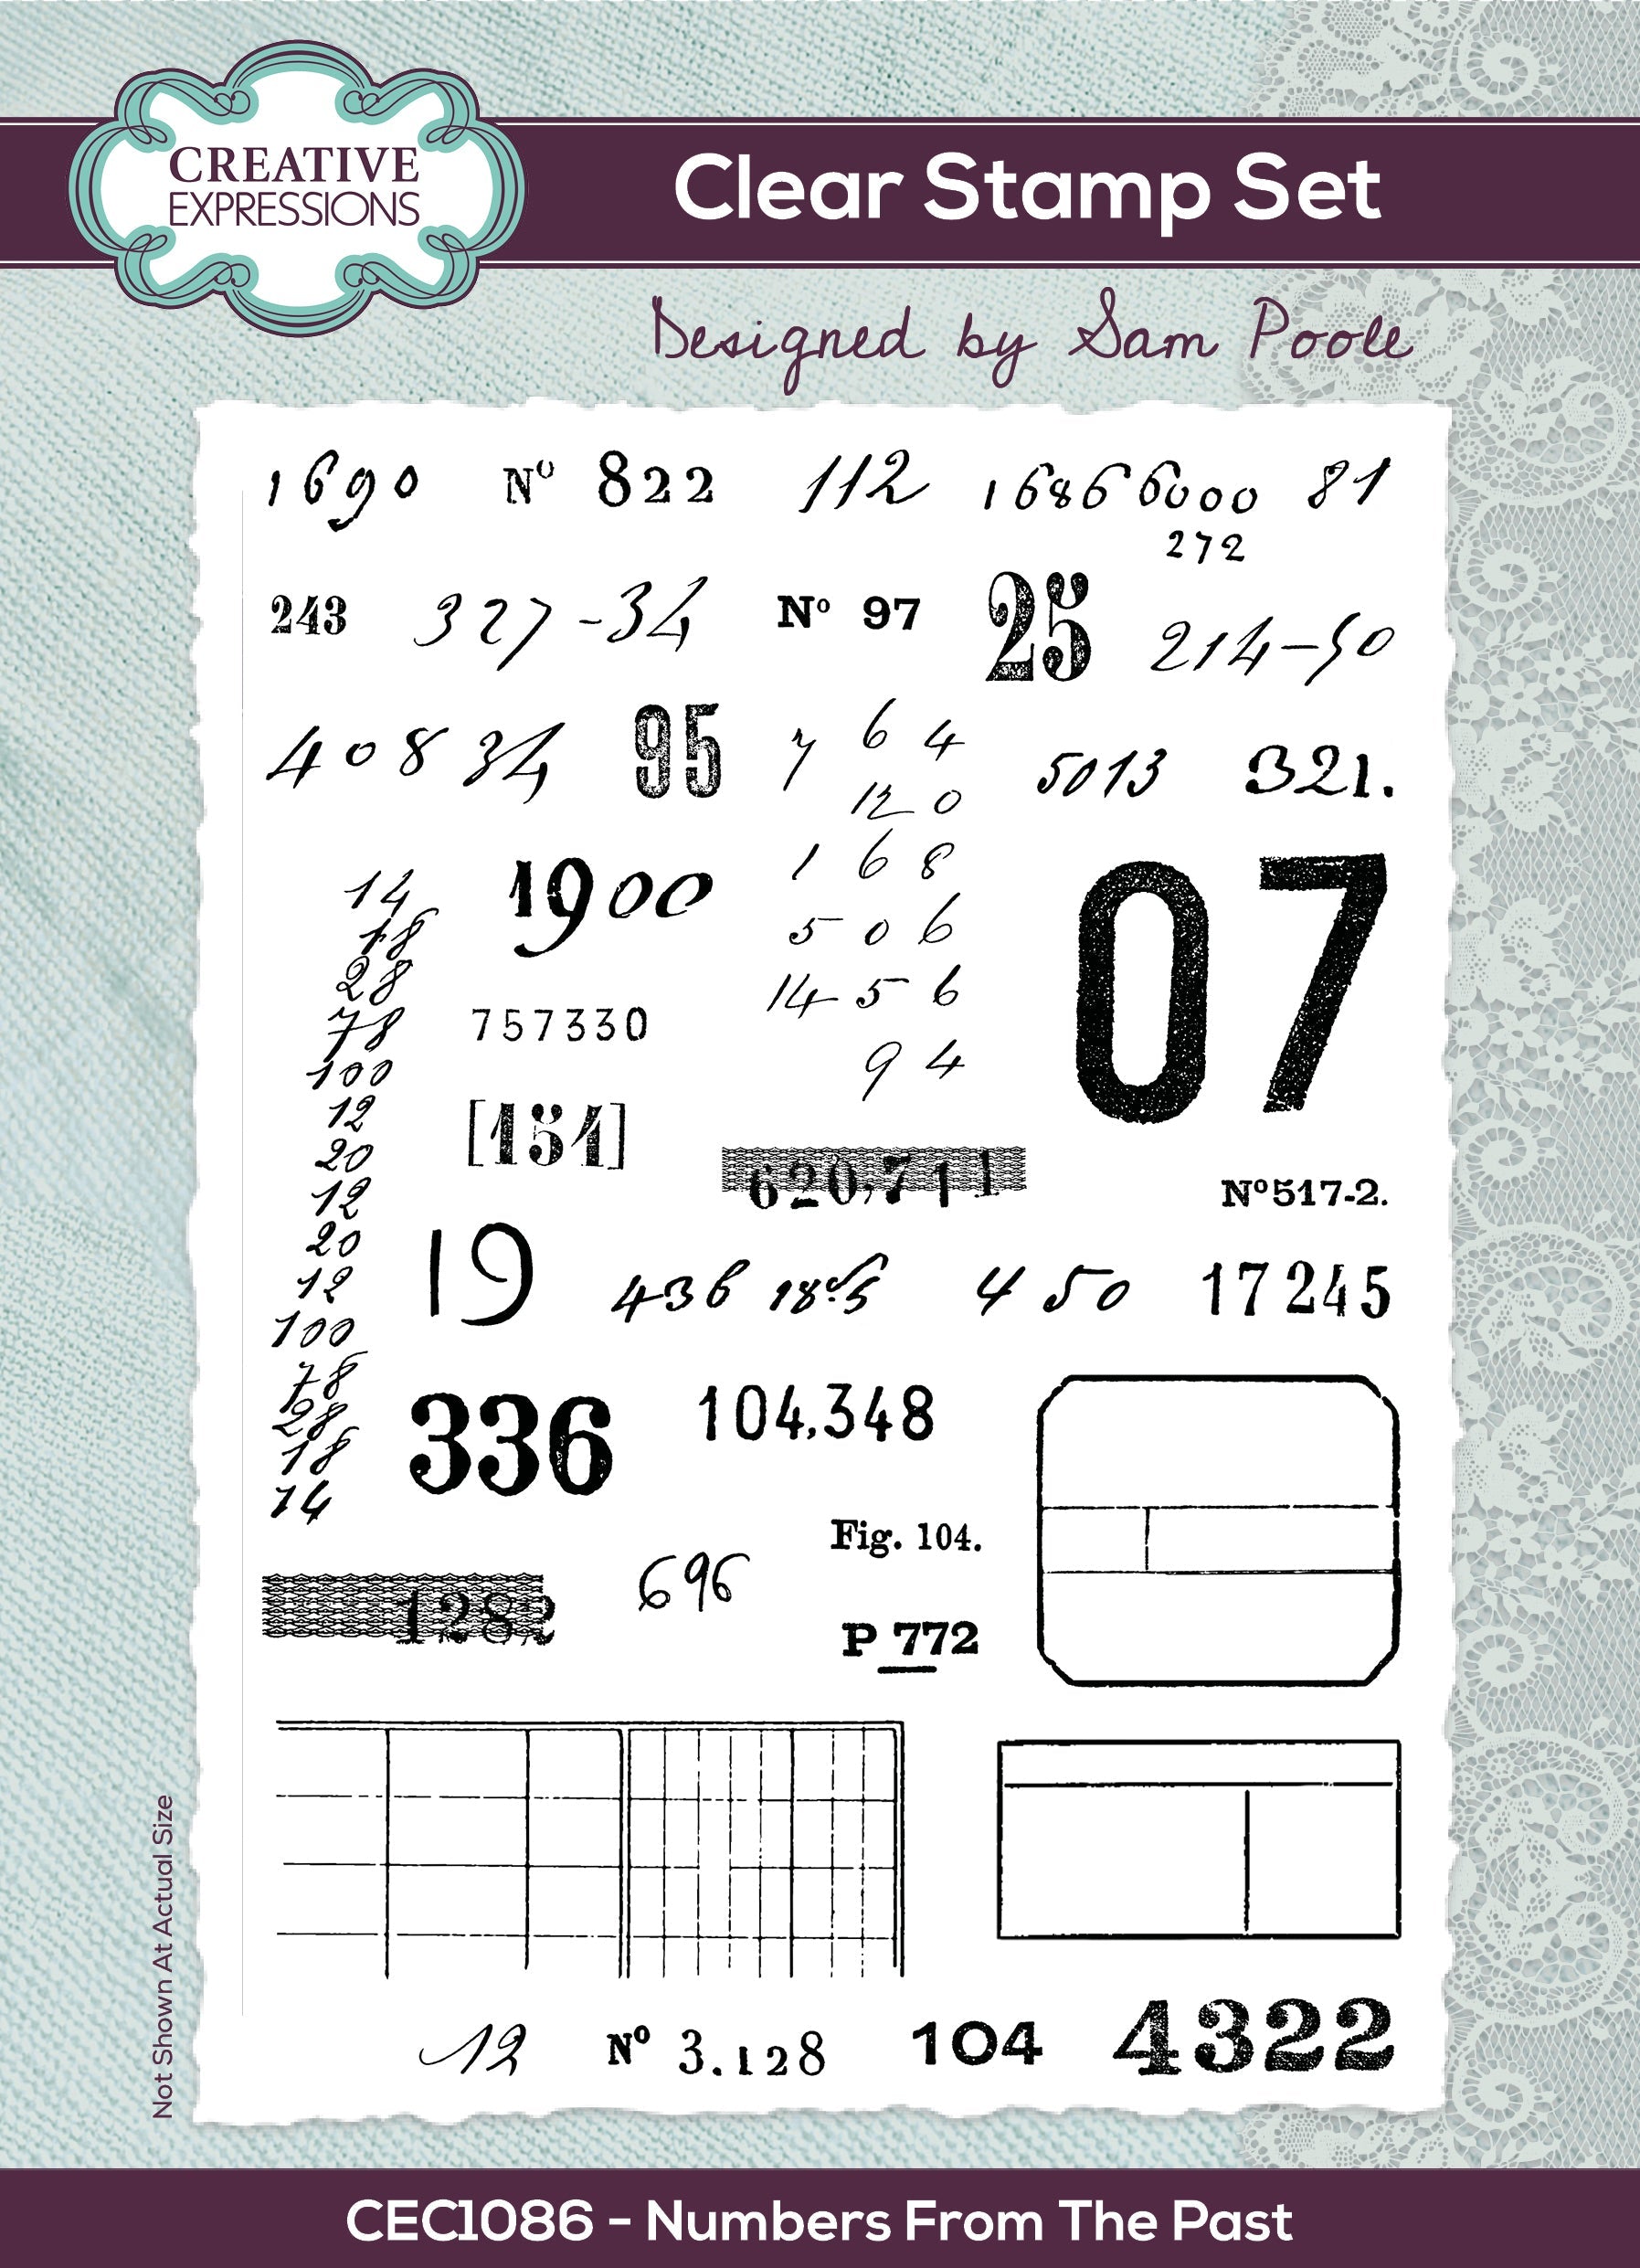 Creative Expressions Sam Poole Numbers From The Past 6 in x 8 in Clear Stamp Set